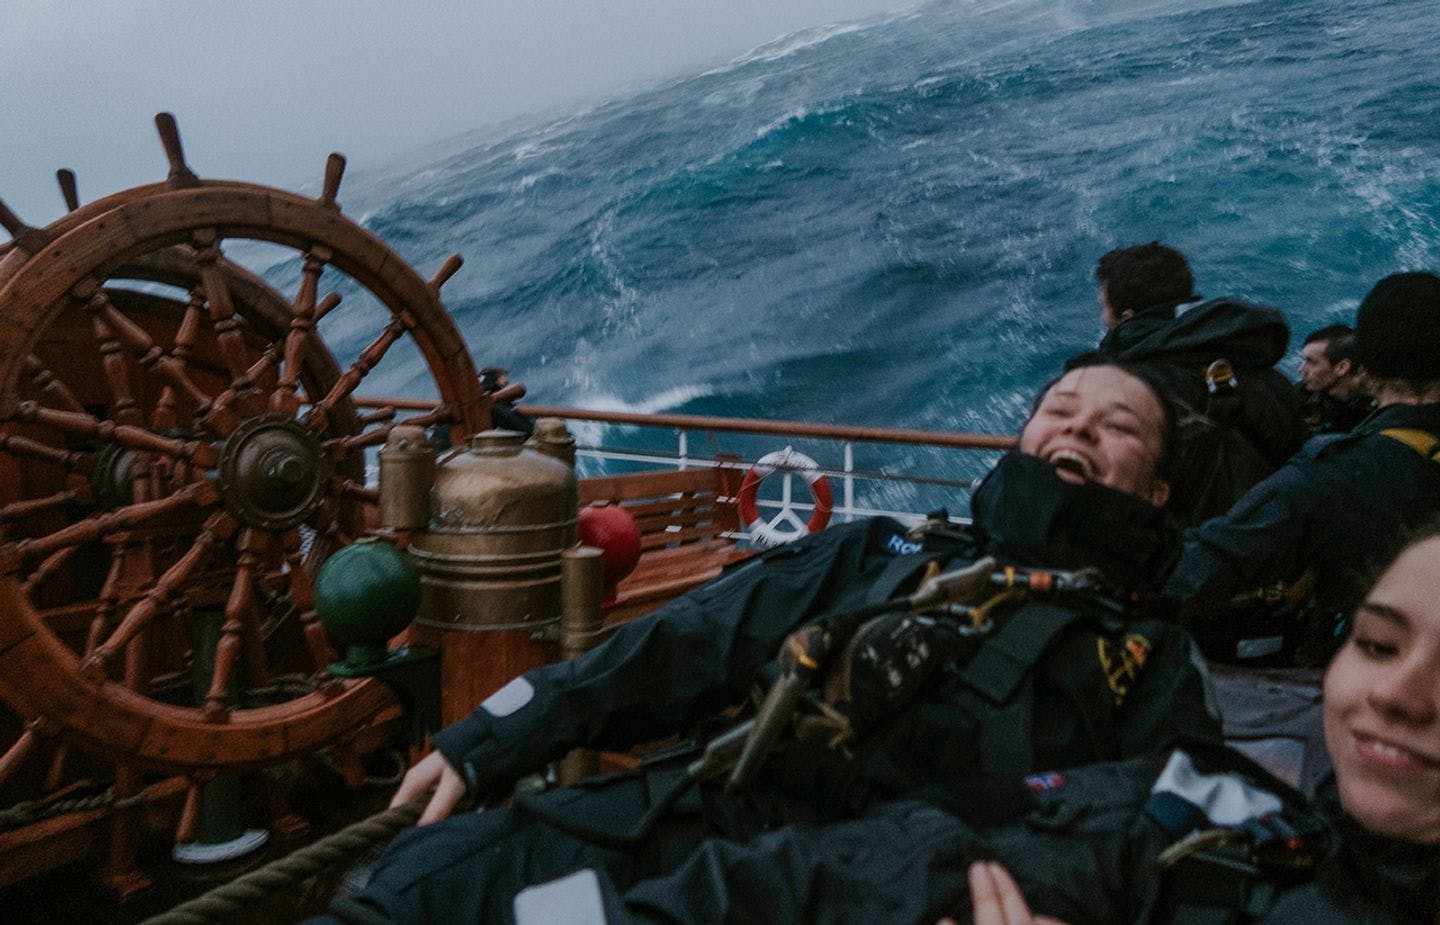 Riding out a winter storm in the north Atlantic. Photo: Hanna Thevik